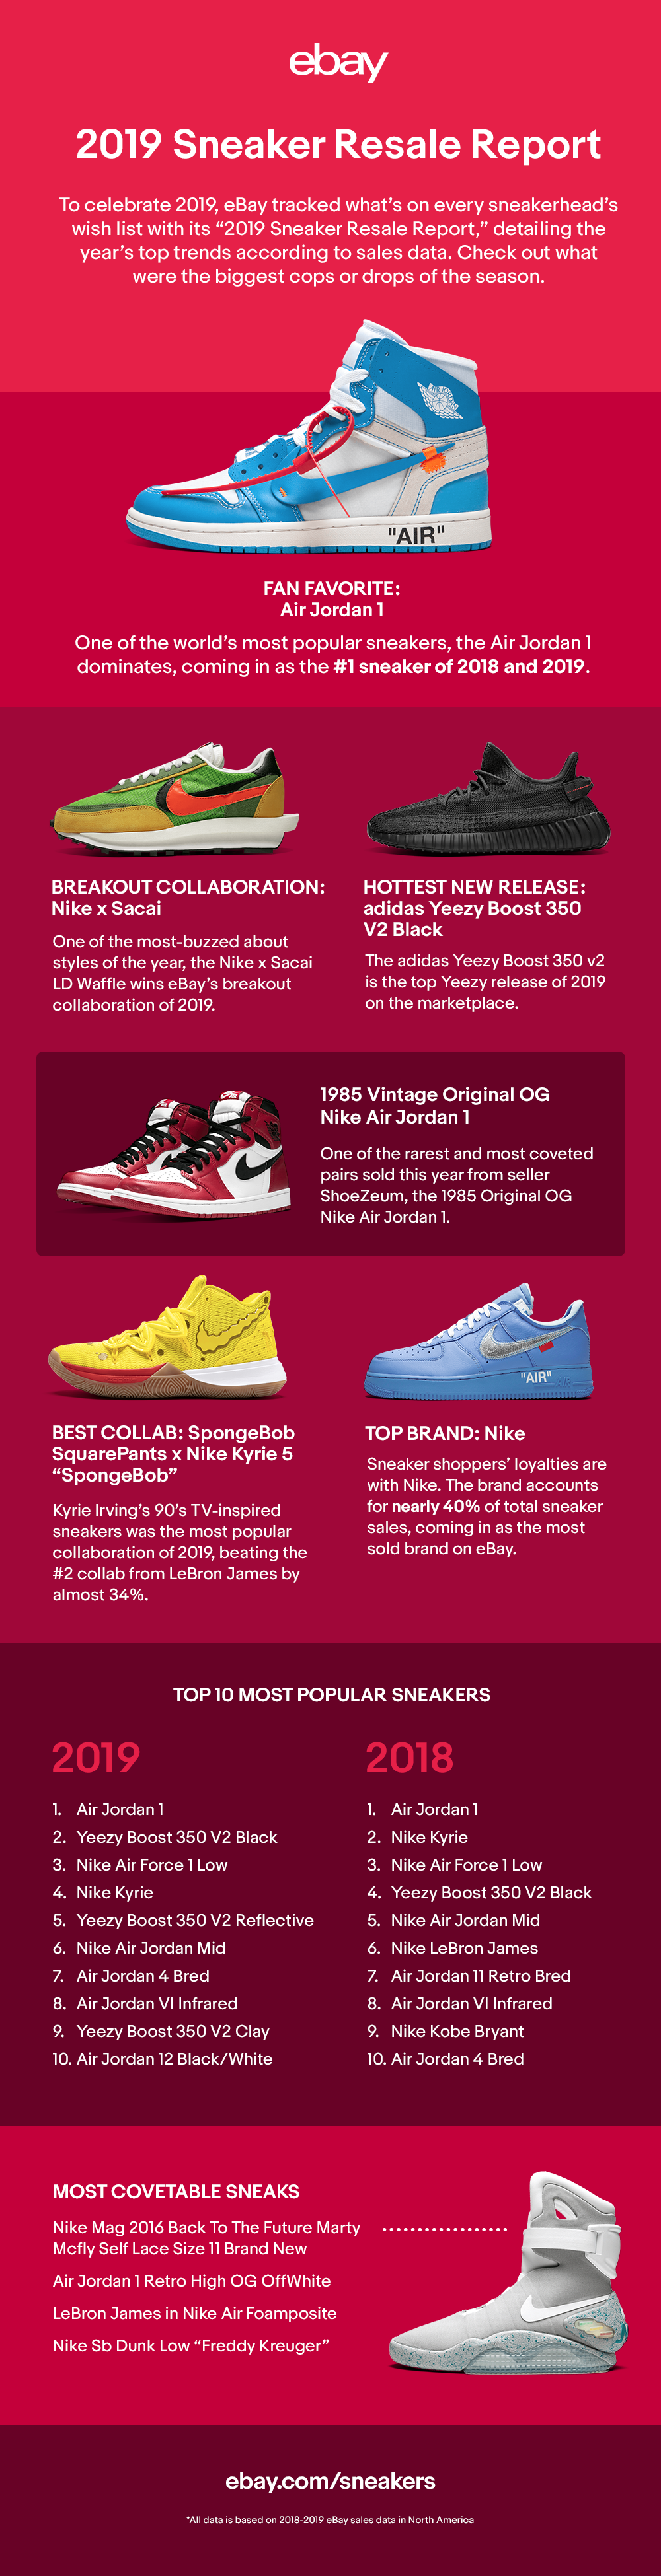 best shoes to resell 2019